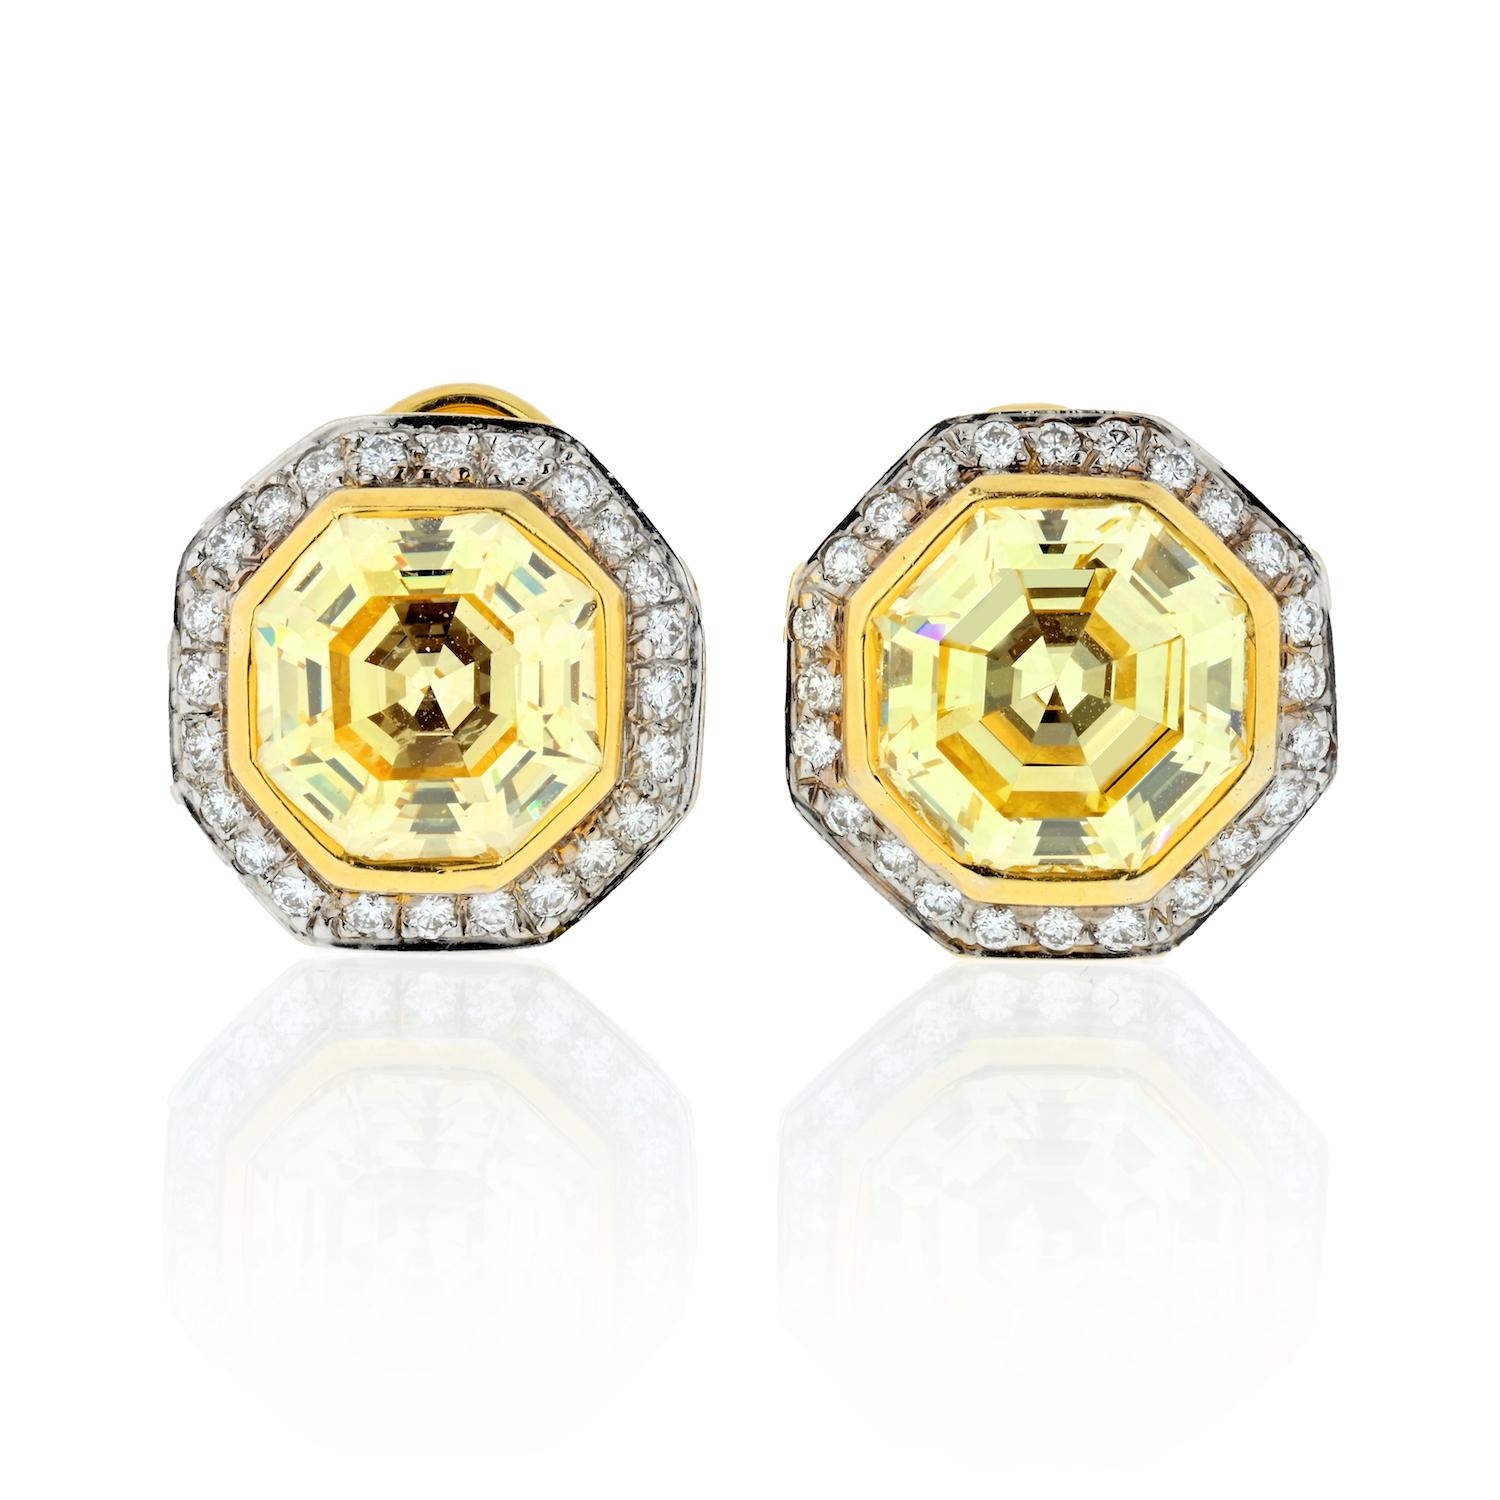 An absolutely exquisite pair of Fancy Yellow GIA certified diamond stud earrings. This gorgeous pair of earrings is made of 18K yellow gold and features very unusual Octagonal Step Cut diamonds at its center.  Octagonal step cut diamonds, that's